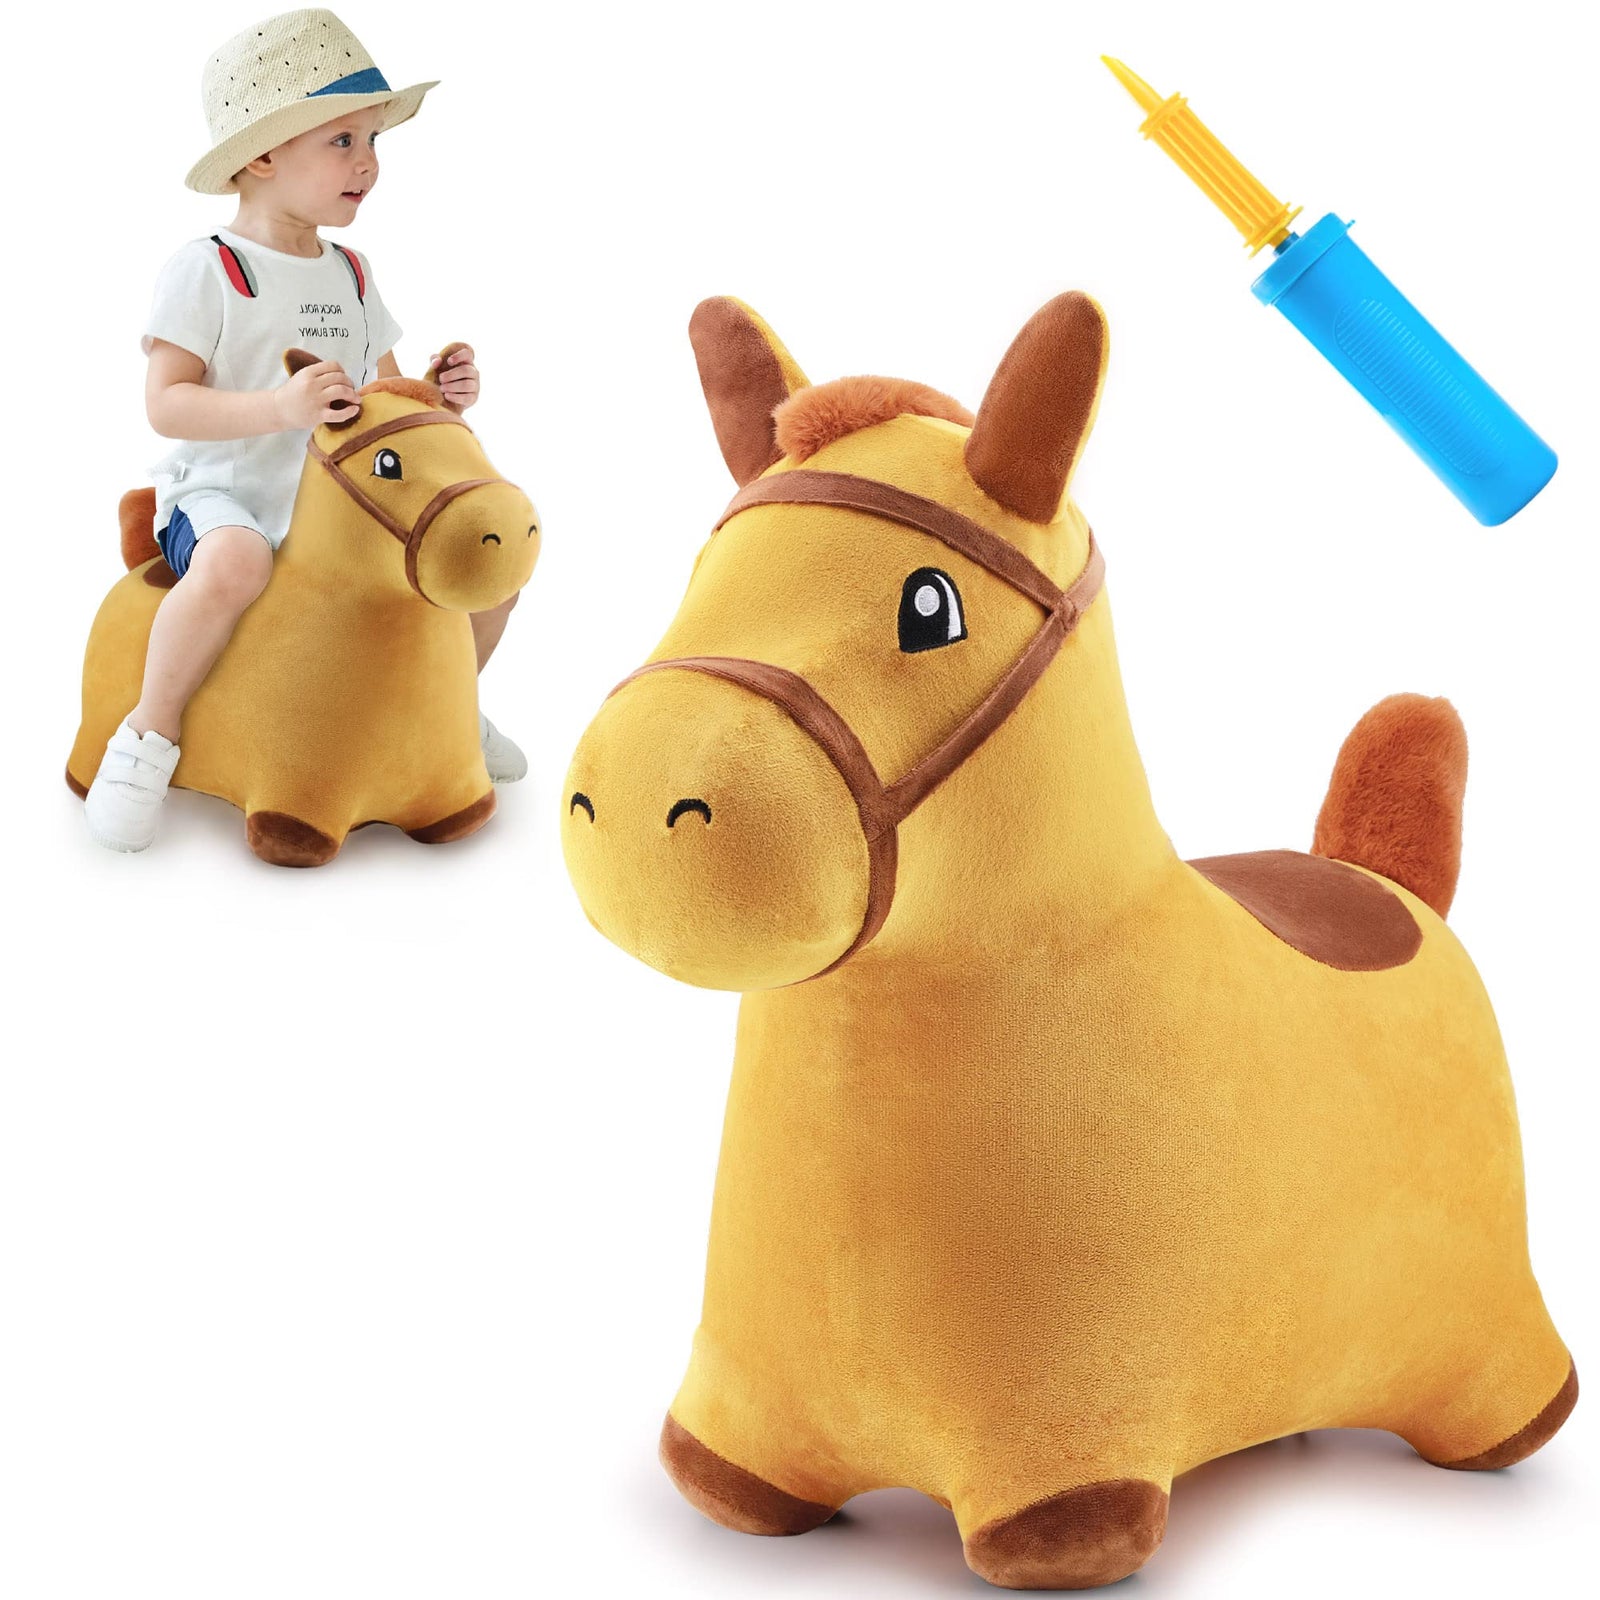 iPlay, iLearn Bouncy Pals Yellow Hopping Horse, Outdoor Ride on Bouncy Animal Play Toys, Inflatable Hopper Plush Covered W/ Pump, Activitie Gift for 18 Months 2 3 4 5 Year Old Kids Toddlers Boys Girls